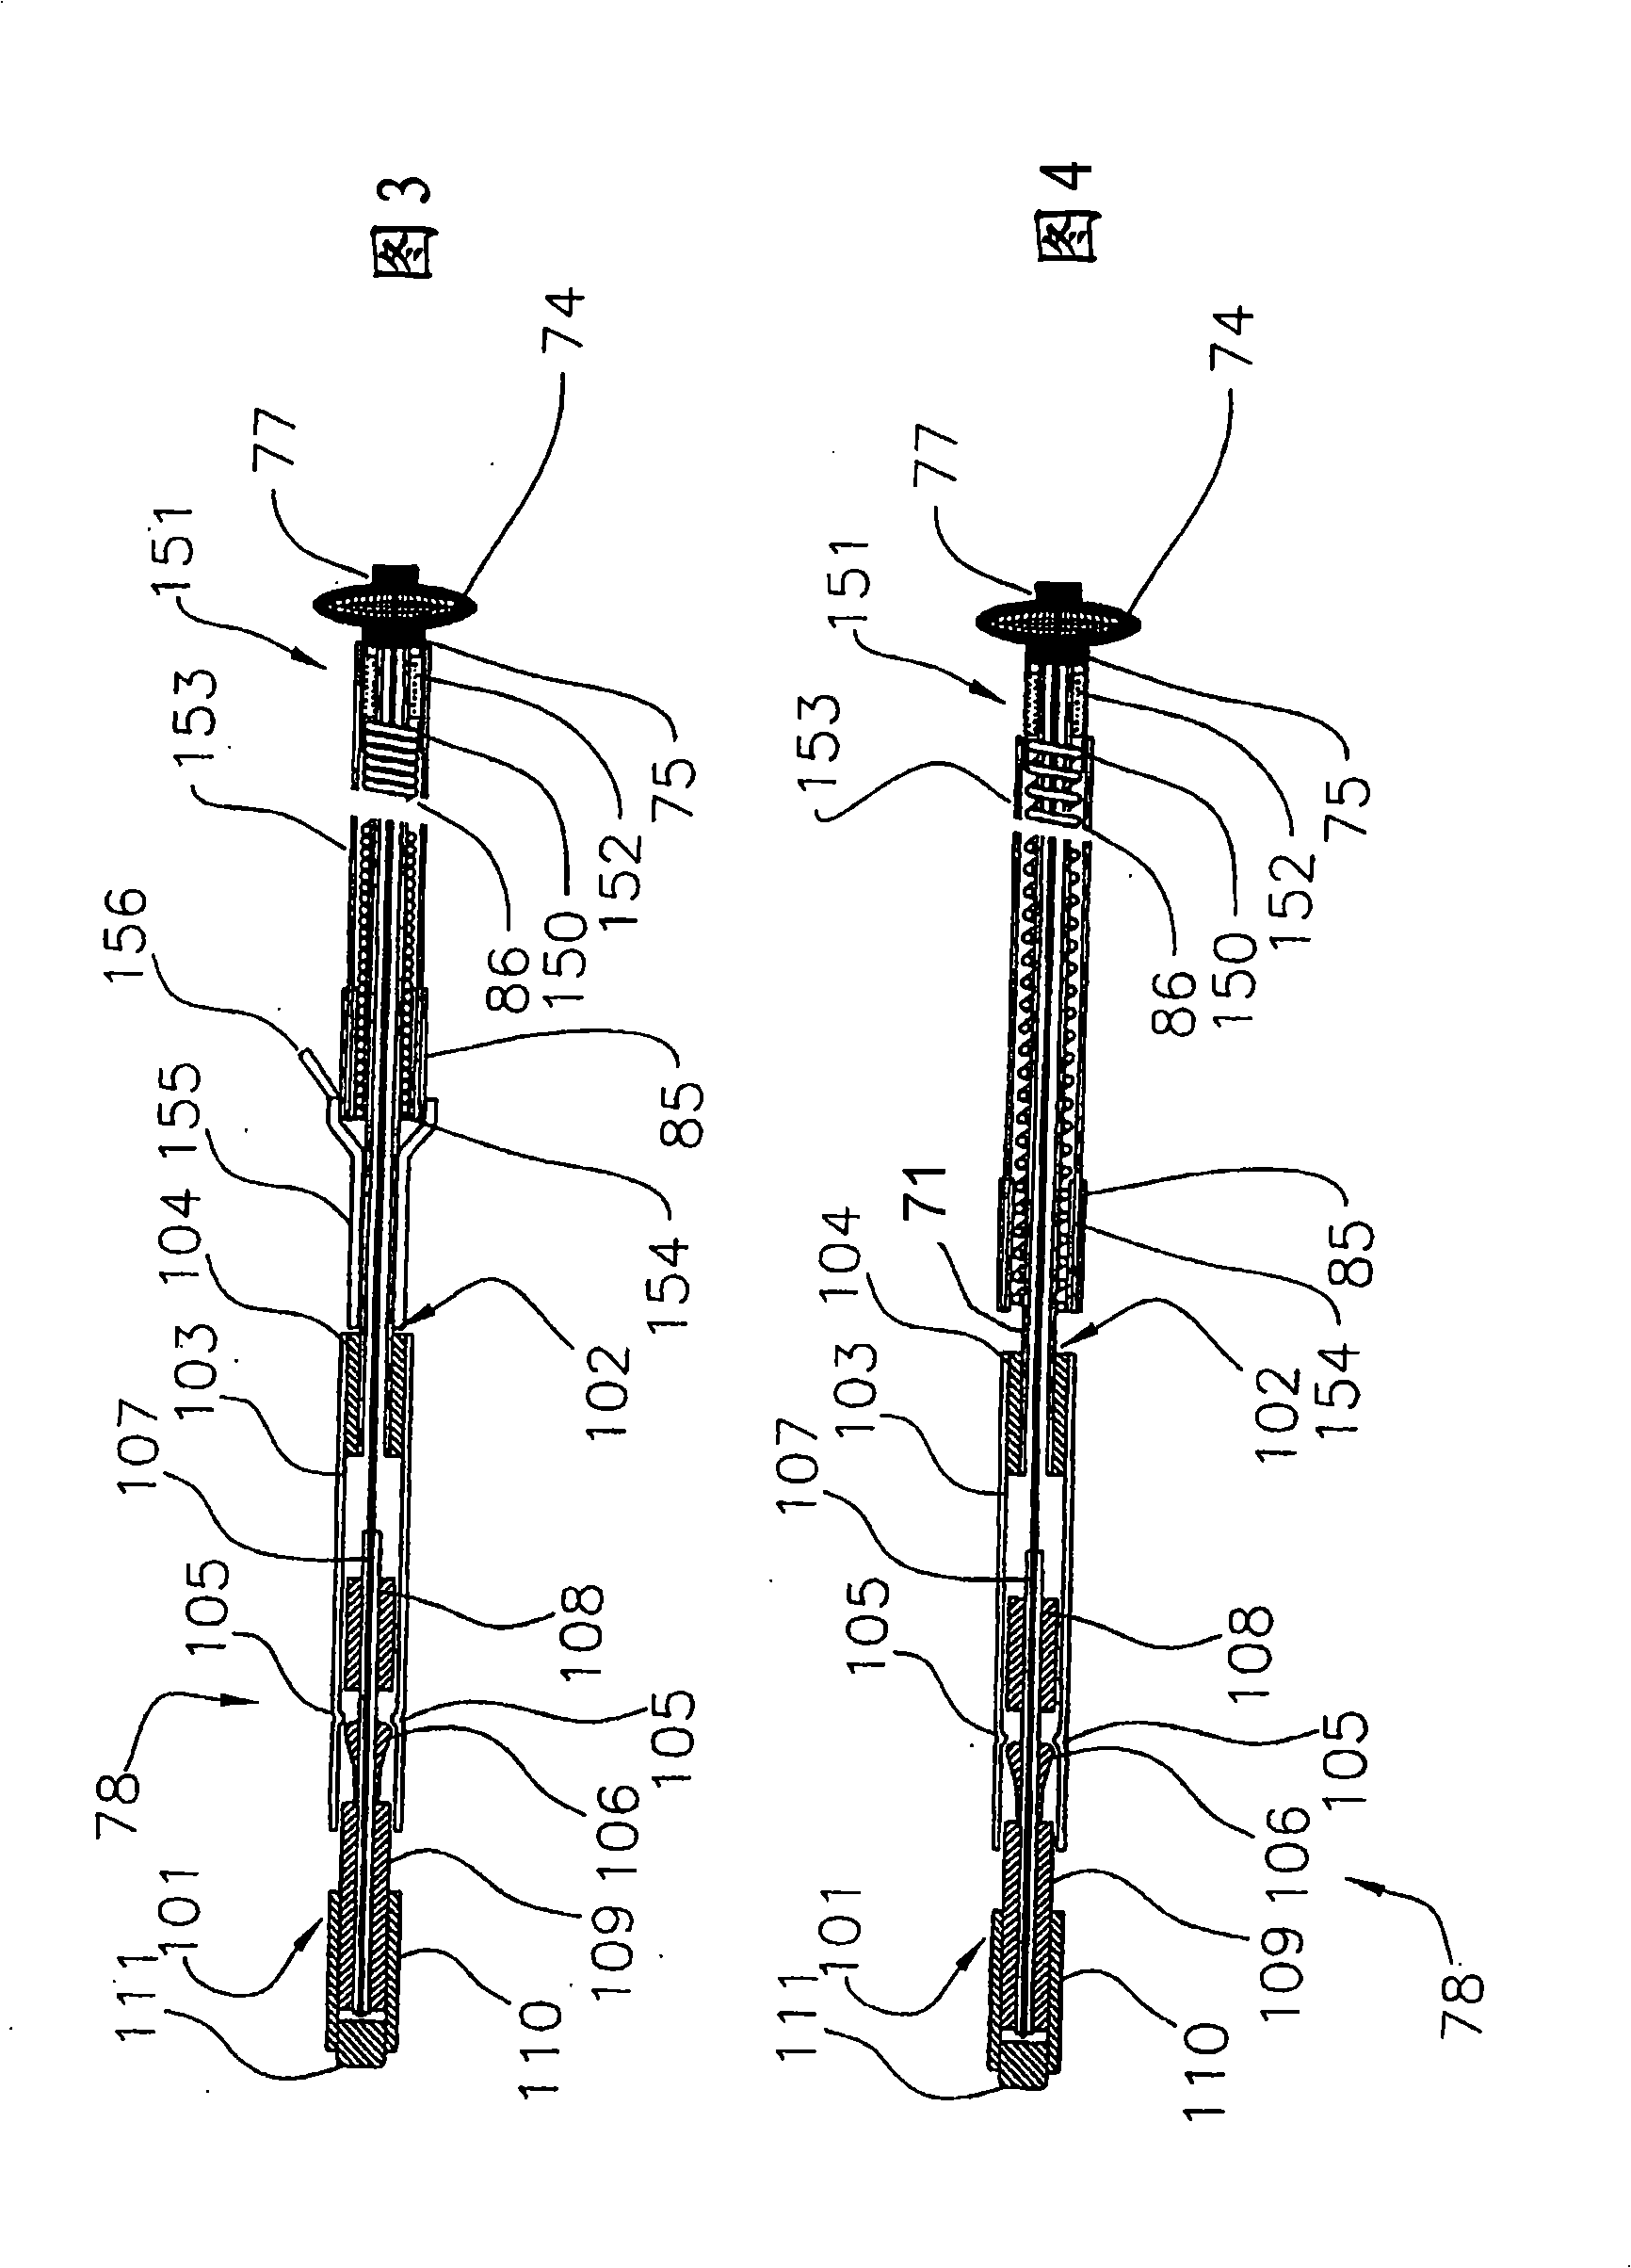 Drug eluting vascular closure devices and methods